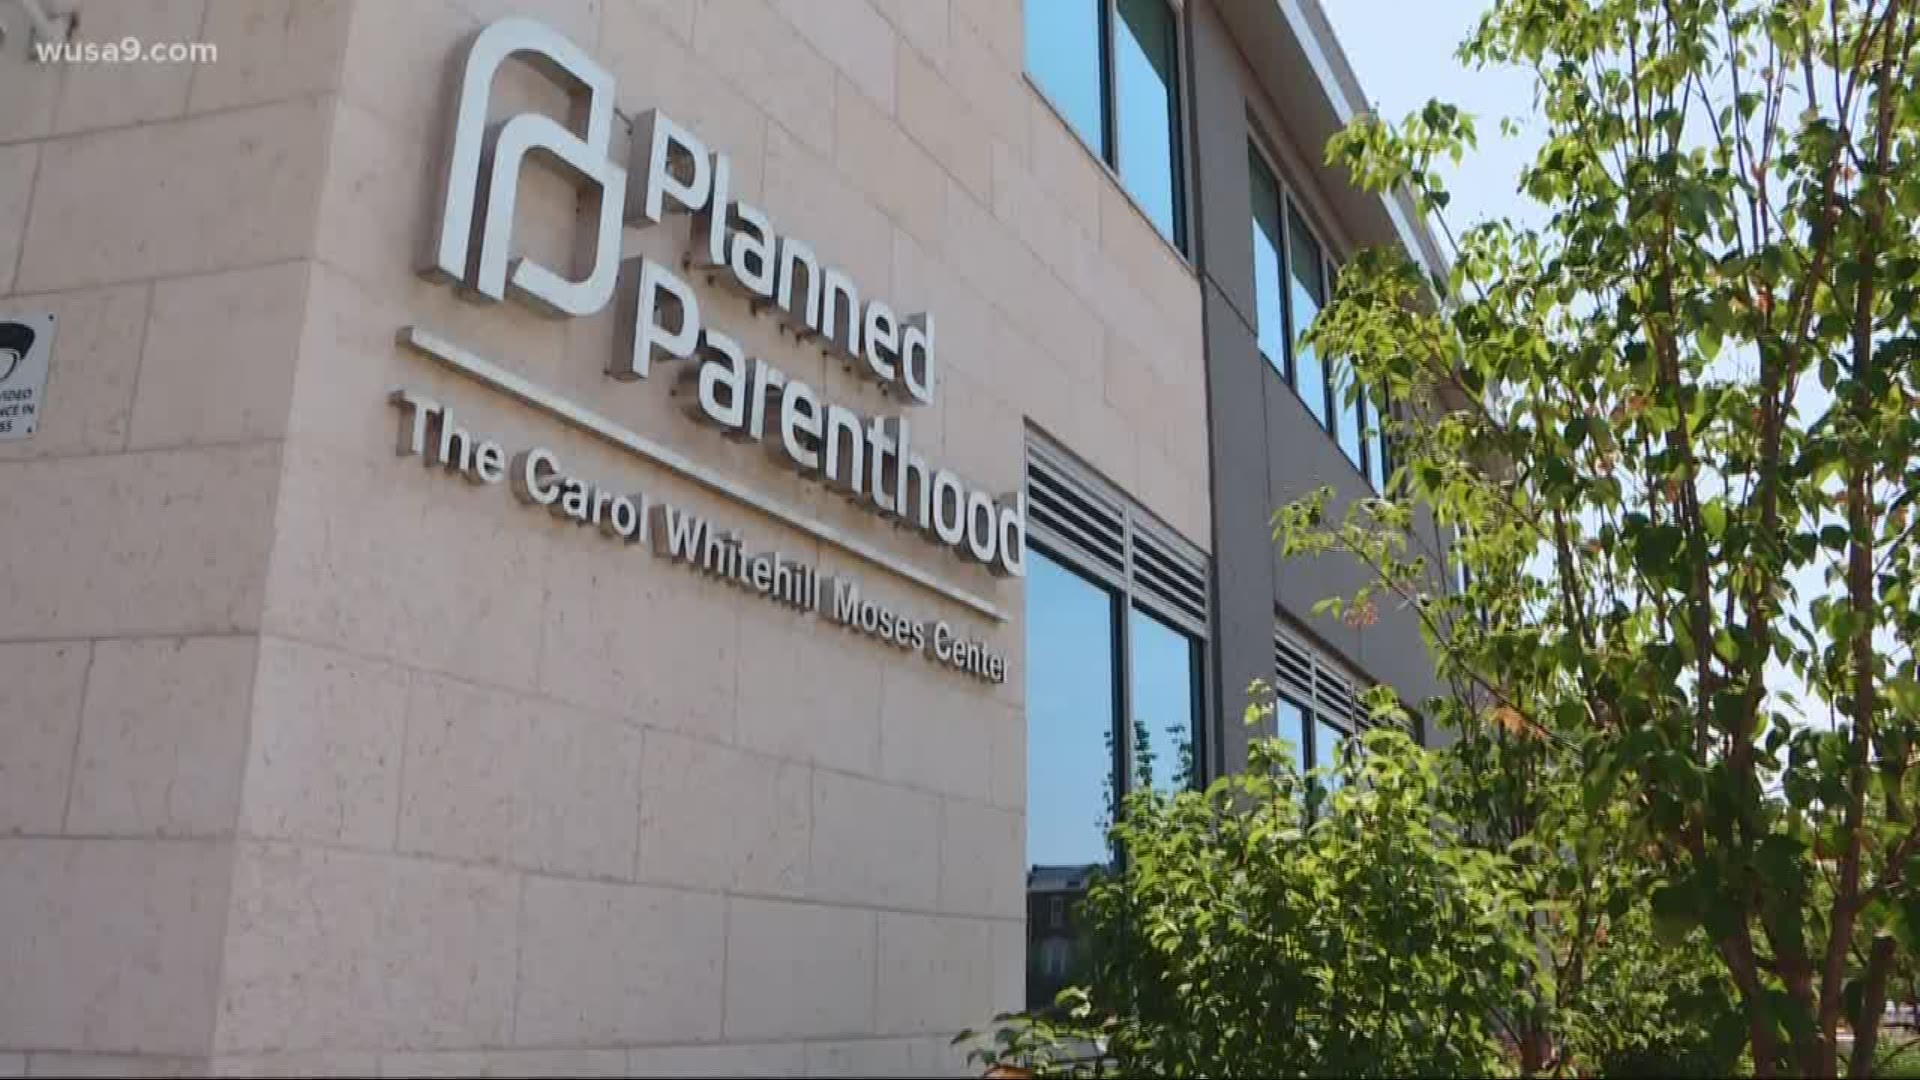 The call to "de-fund Planned Parenthood" has long been a rallying cry on the right. The family planning and abortion services provider has decided to give up millions of dollars in federal funding. It is fighting a new Trump Administration rule that would limit what health providers can tell patients about abortion.